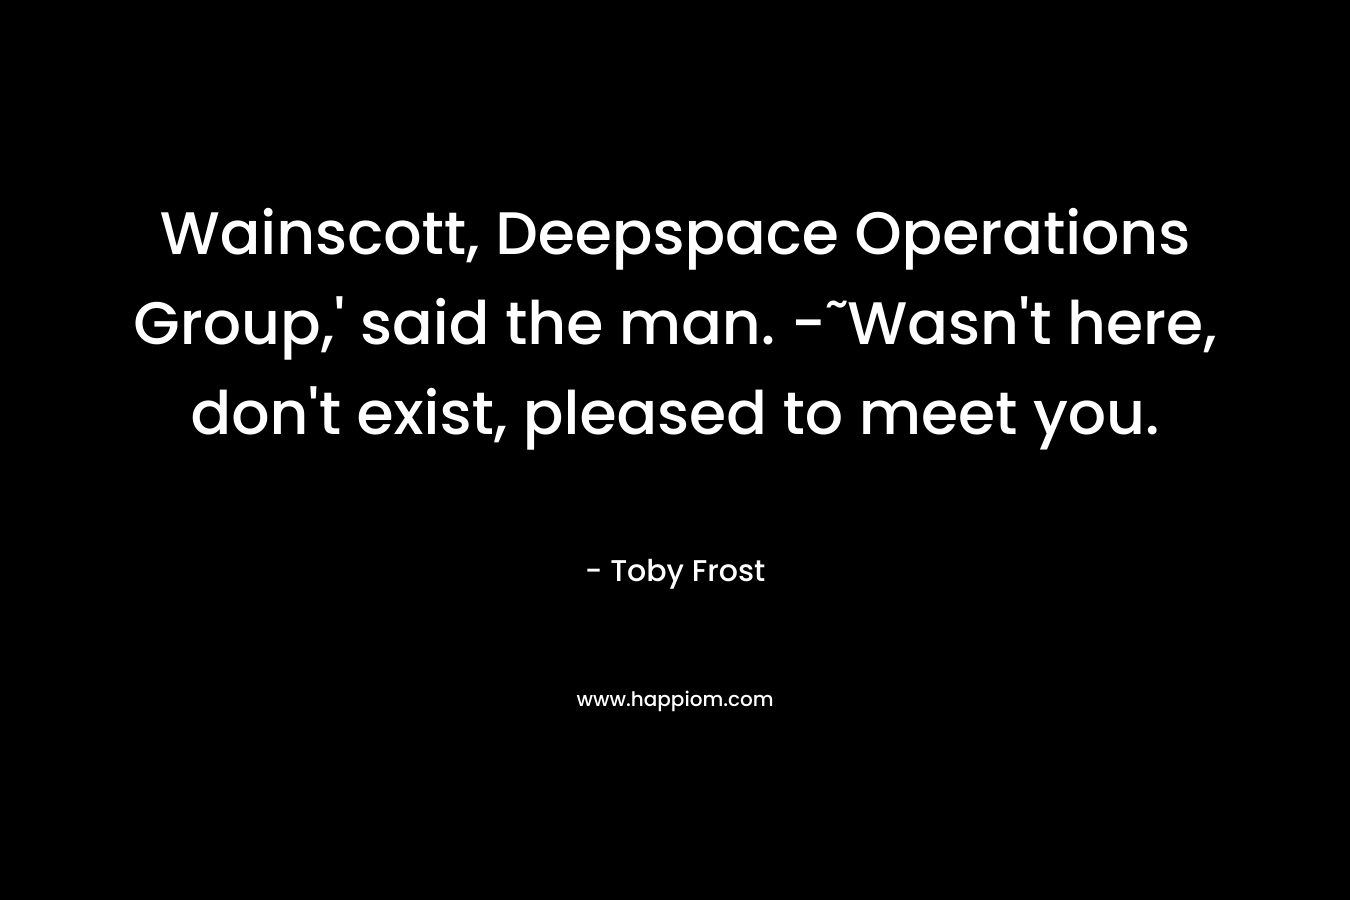 Wainscott, Deepspace Operations Group,' said the man. -˜Wasn't here, don't exist, pleased to meet you.